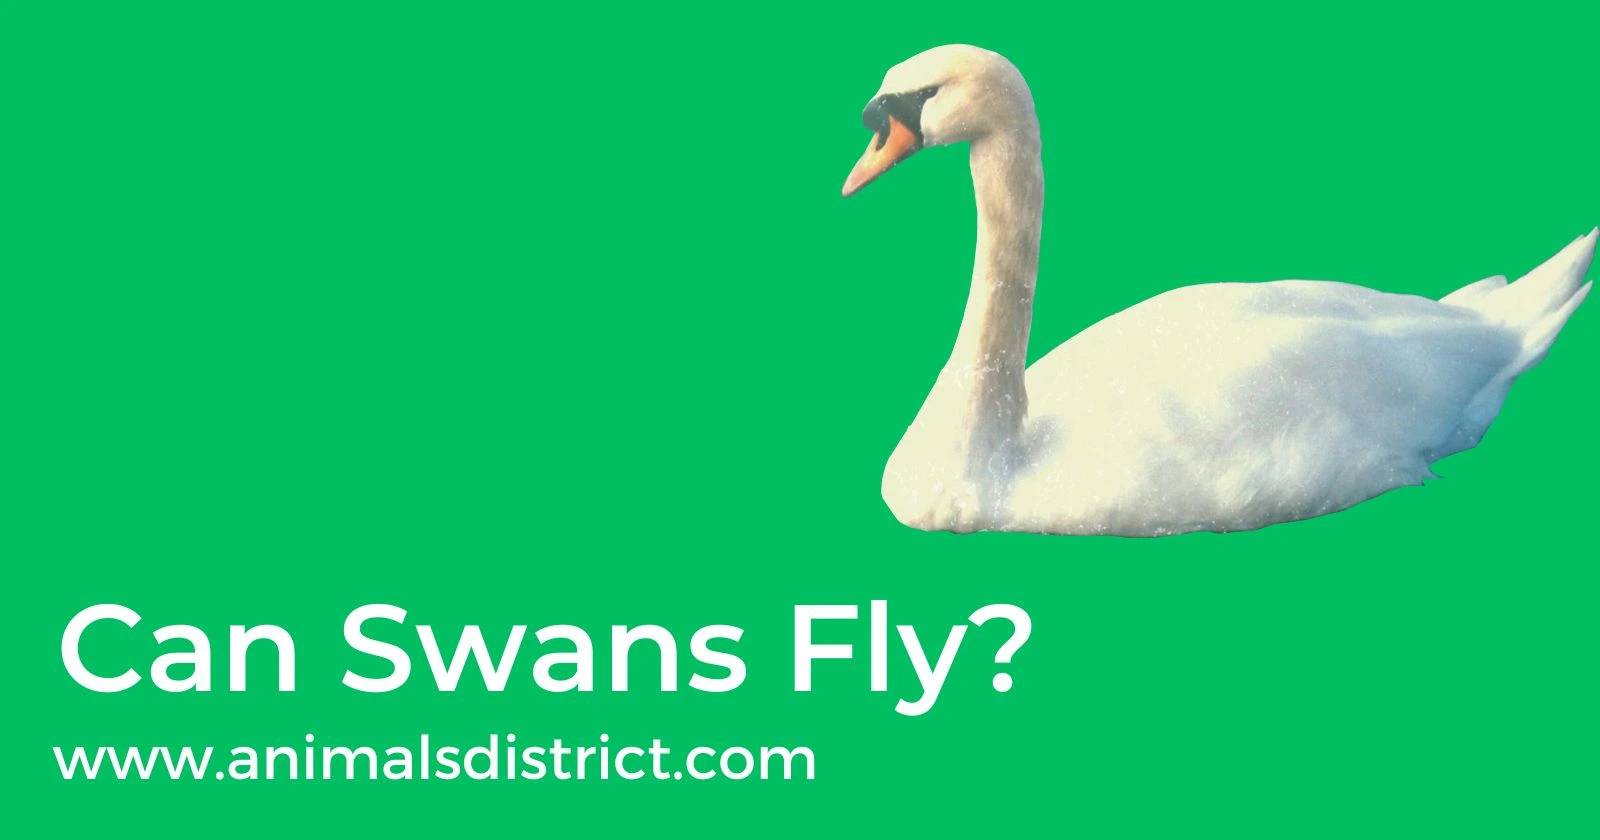 Can Swans Fly